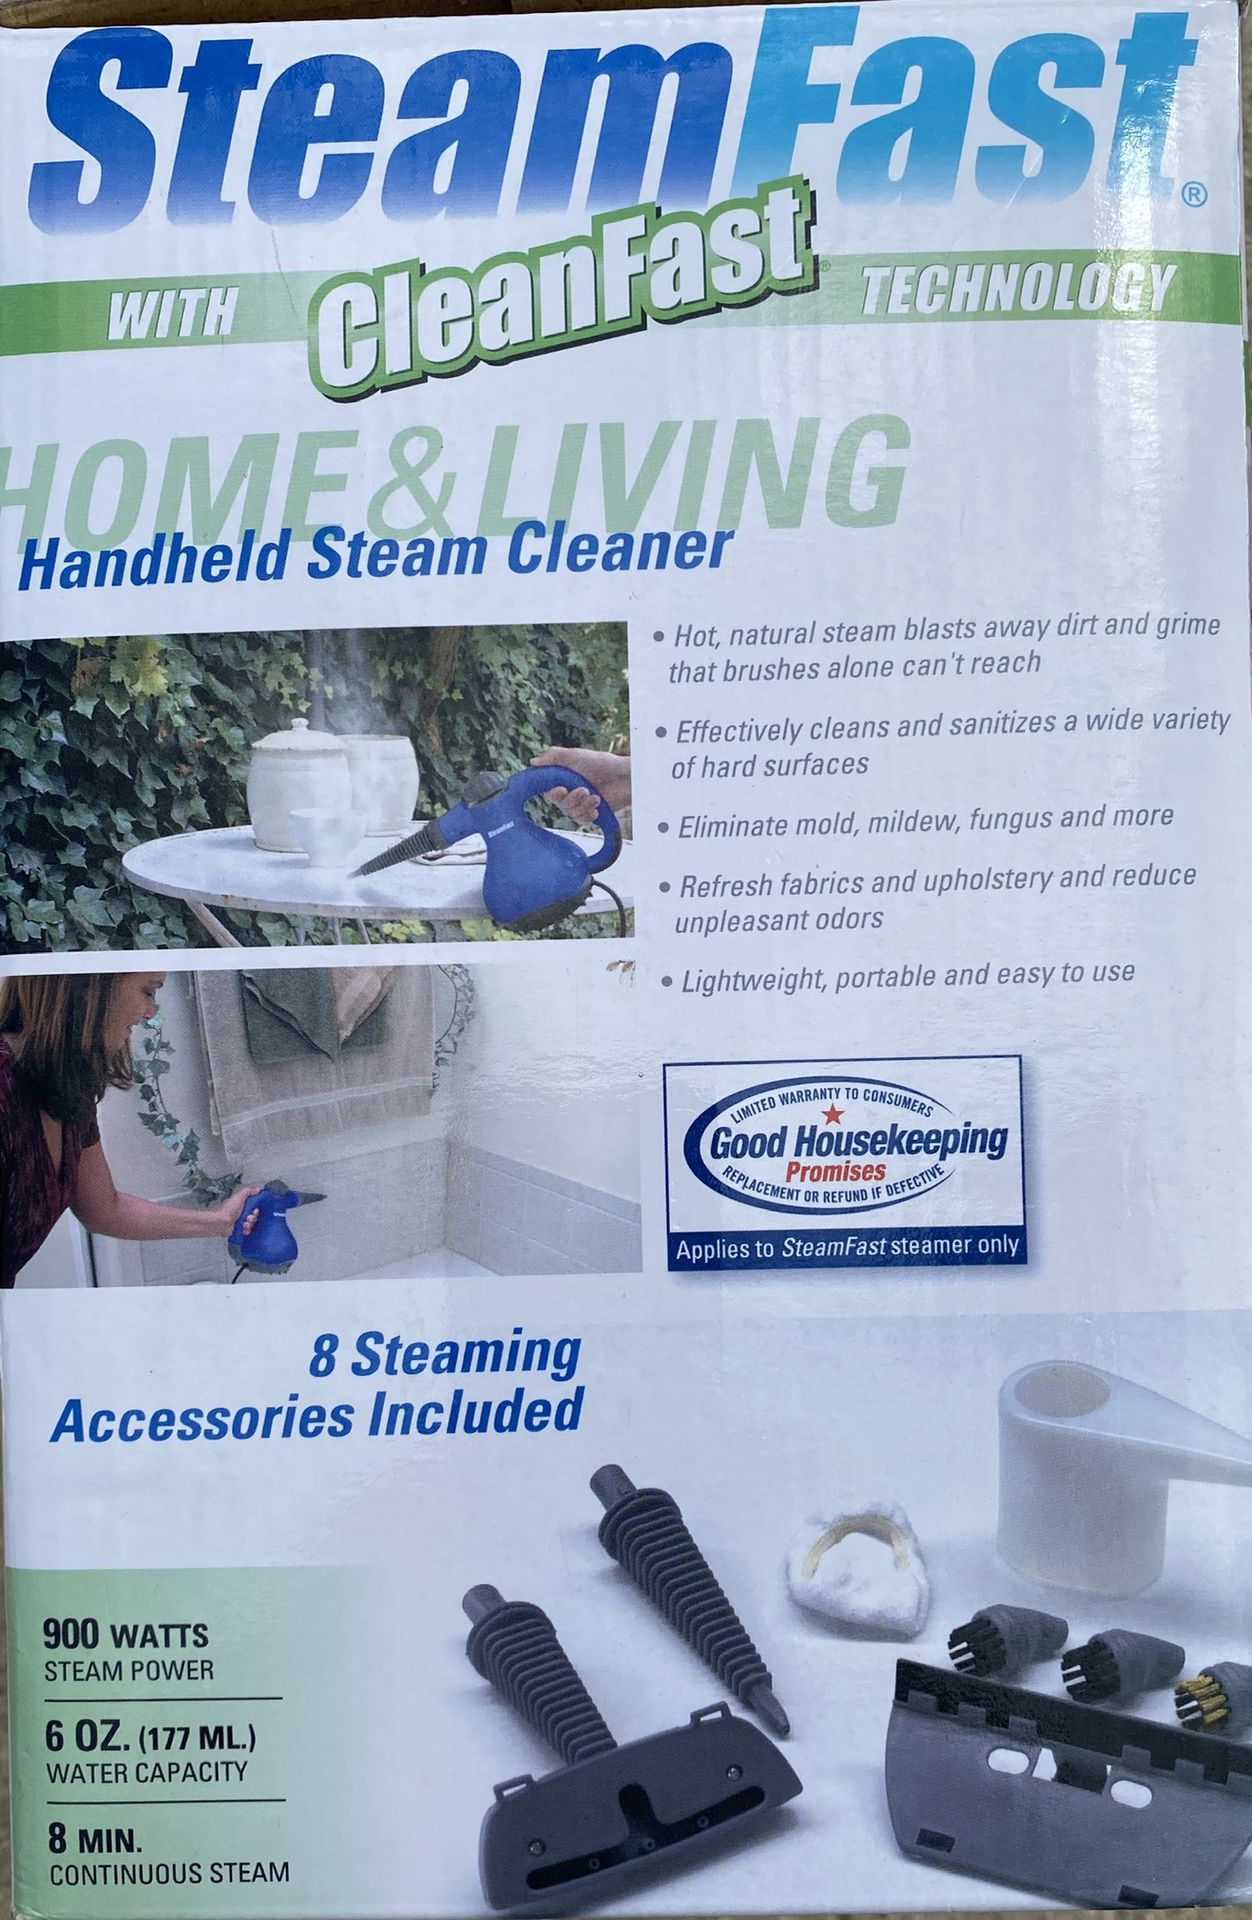 NEW IN BOX Steam Fast SF-226 hand-held steam cleaner